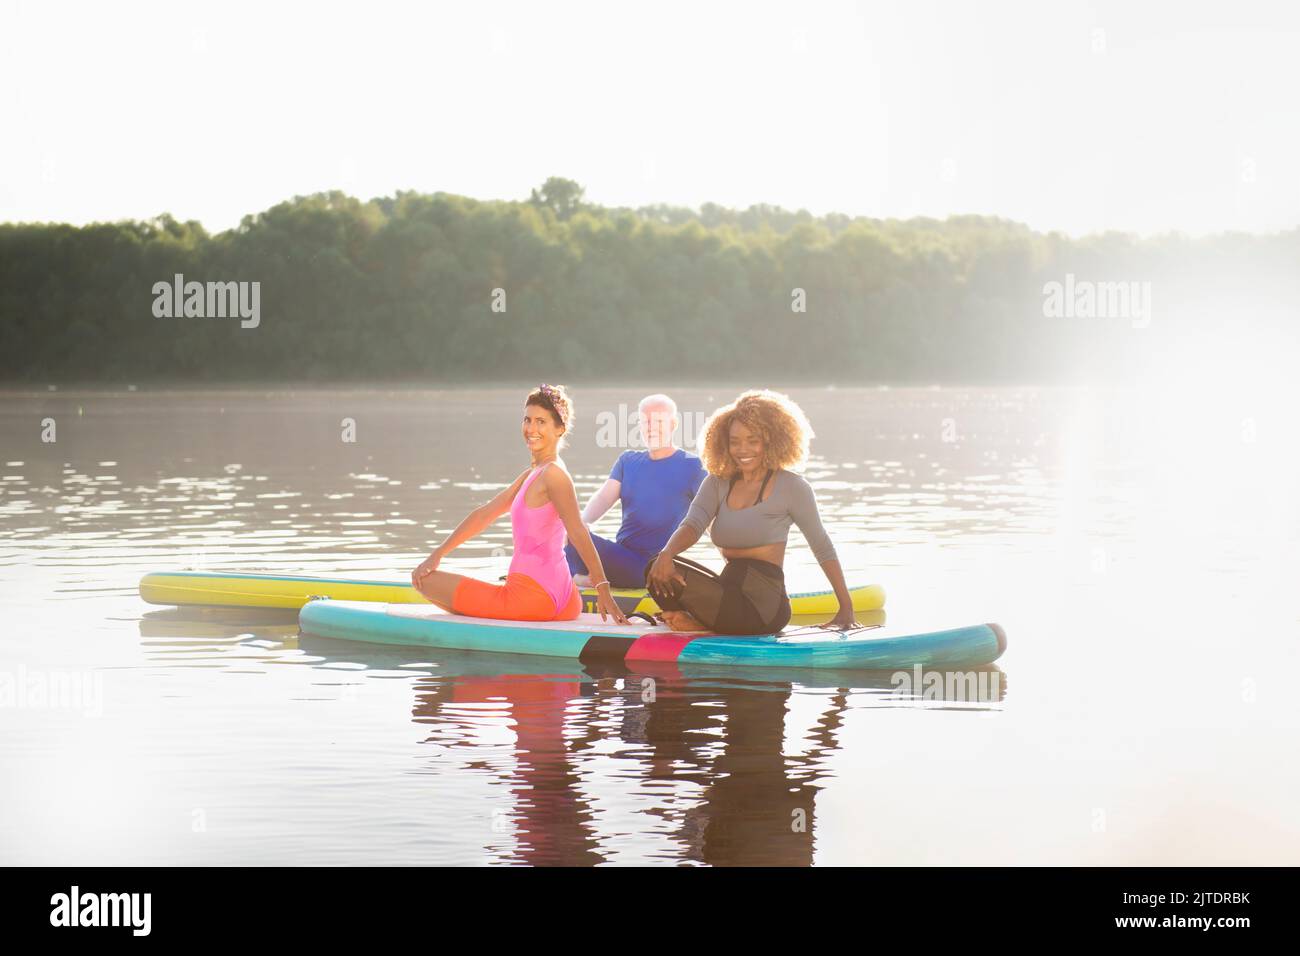 Group of people taking care of their mental health by relaxing themselves on SUP boards Stock Photo